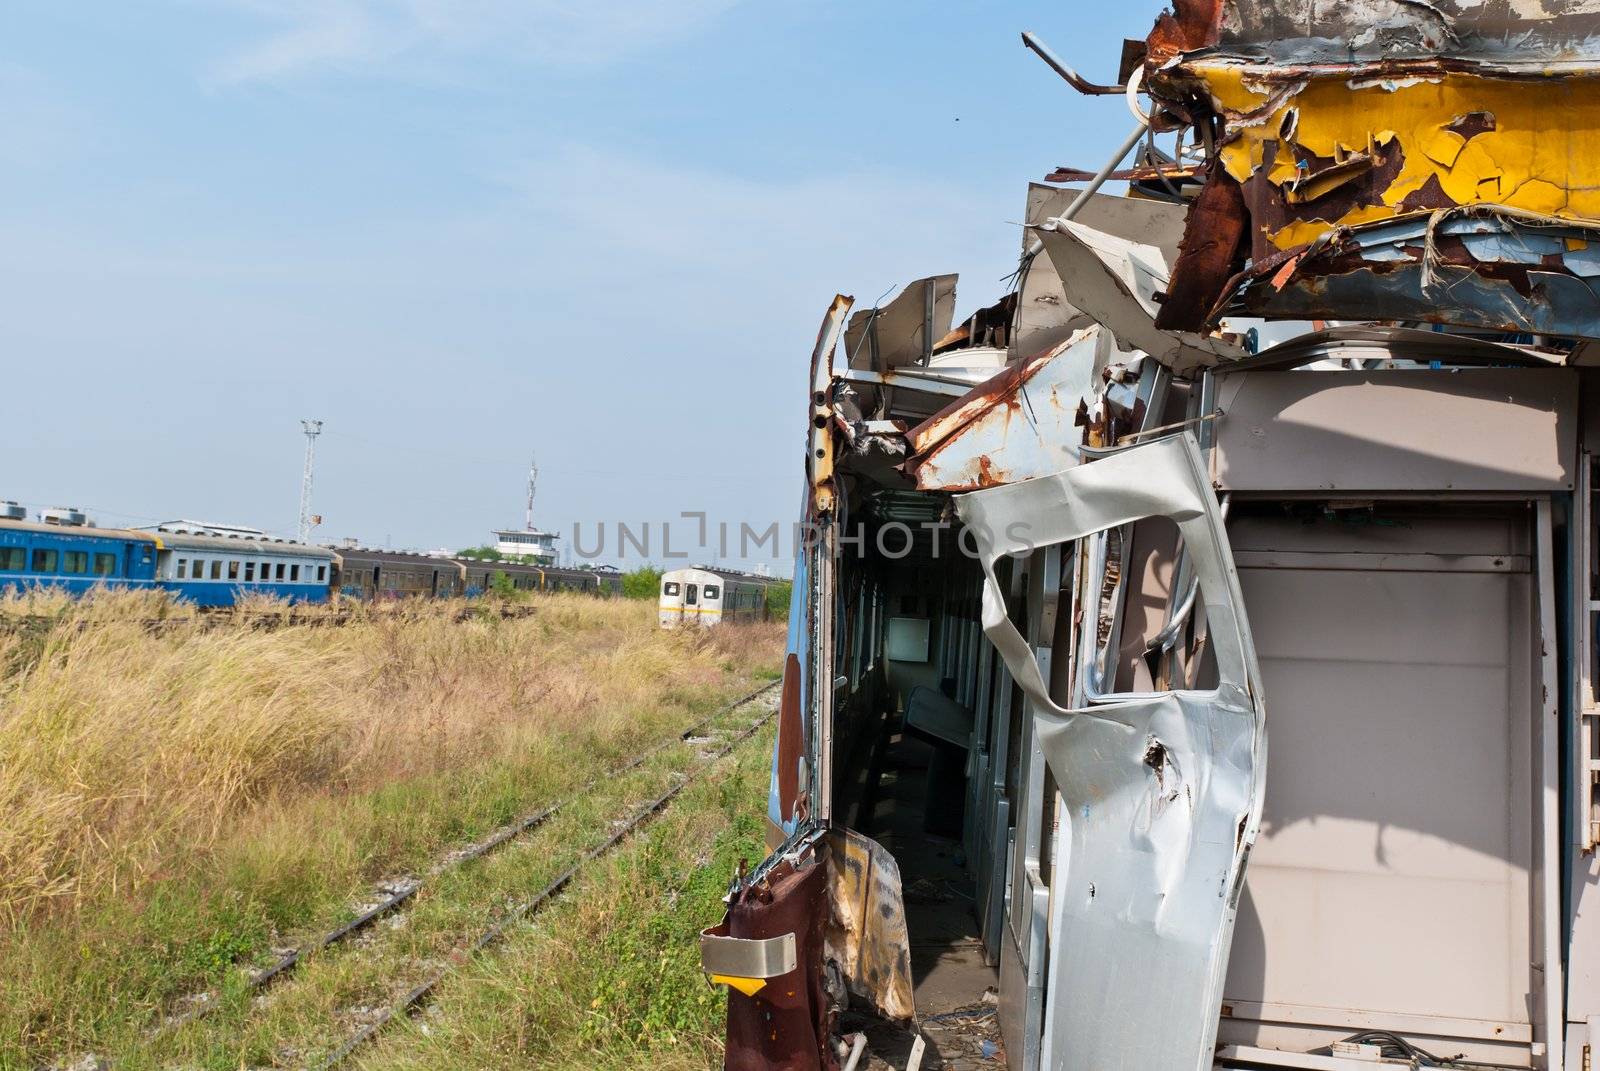 A wreckage of crashed or damaged train taken from train yard taken on sunny day, can be use for safety related communications
